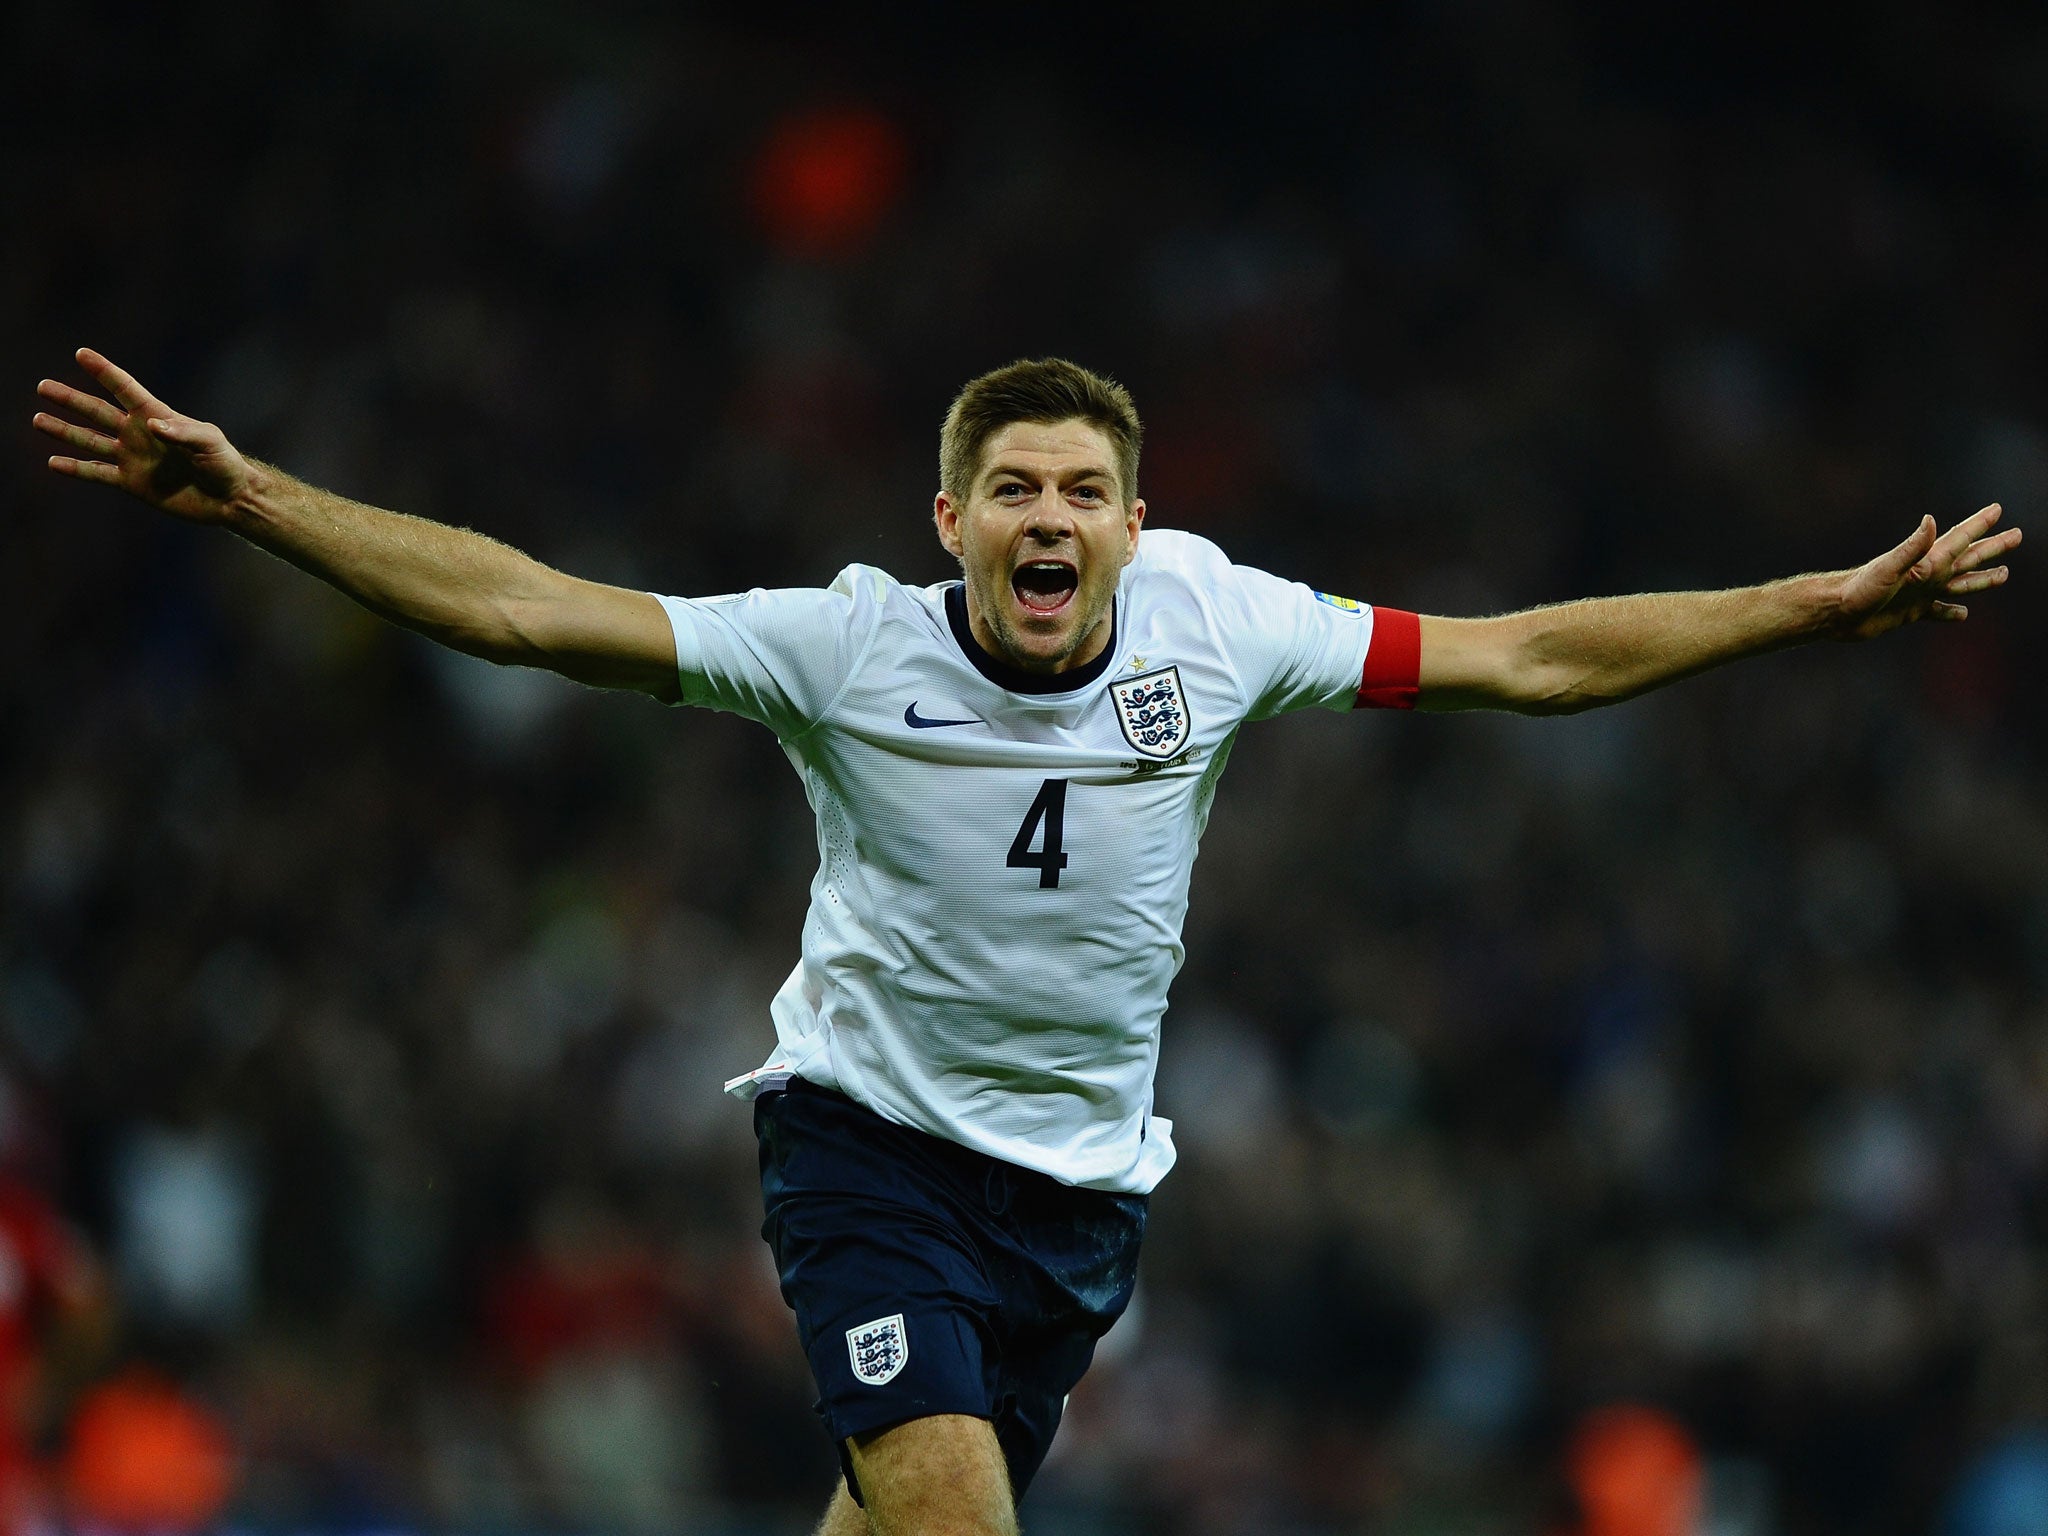 Liverpool manager Steven Gerrard has admitted that Steven Gerrard could retire from international football following England's 2014 World Cup campaign